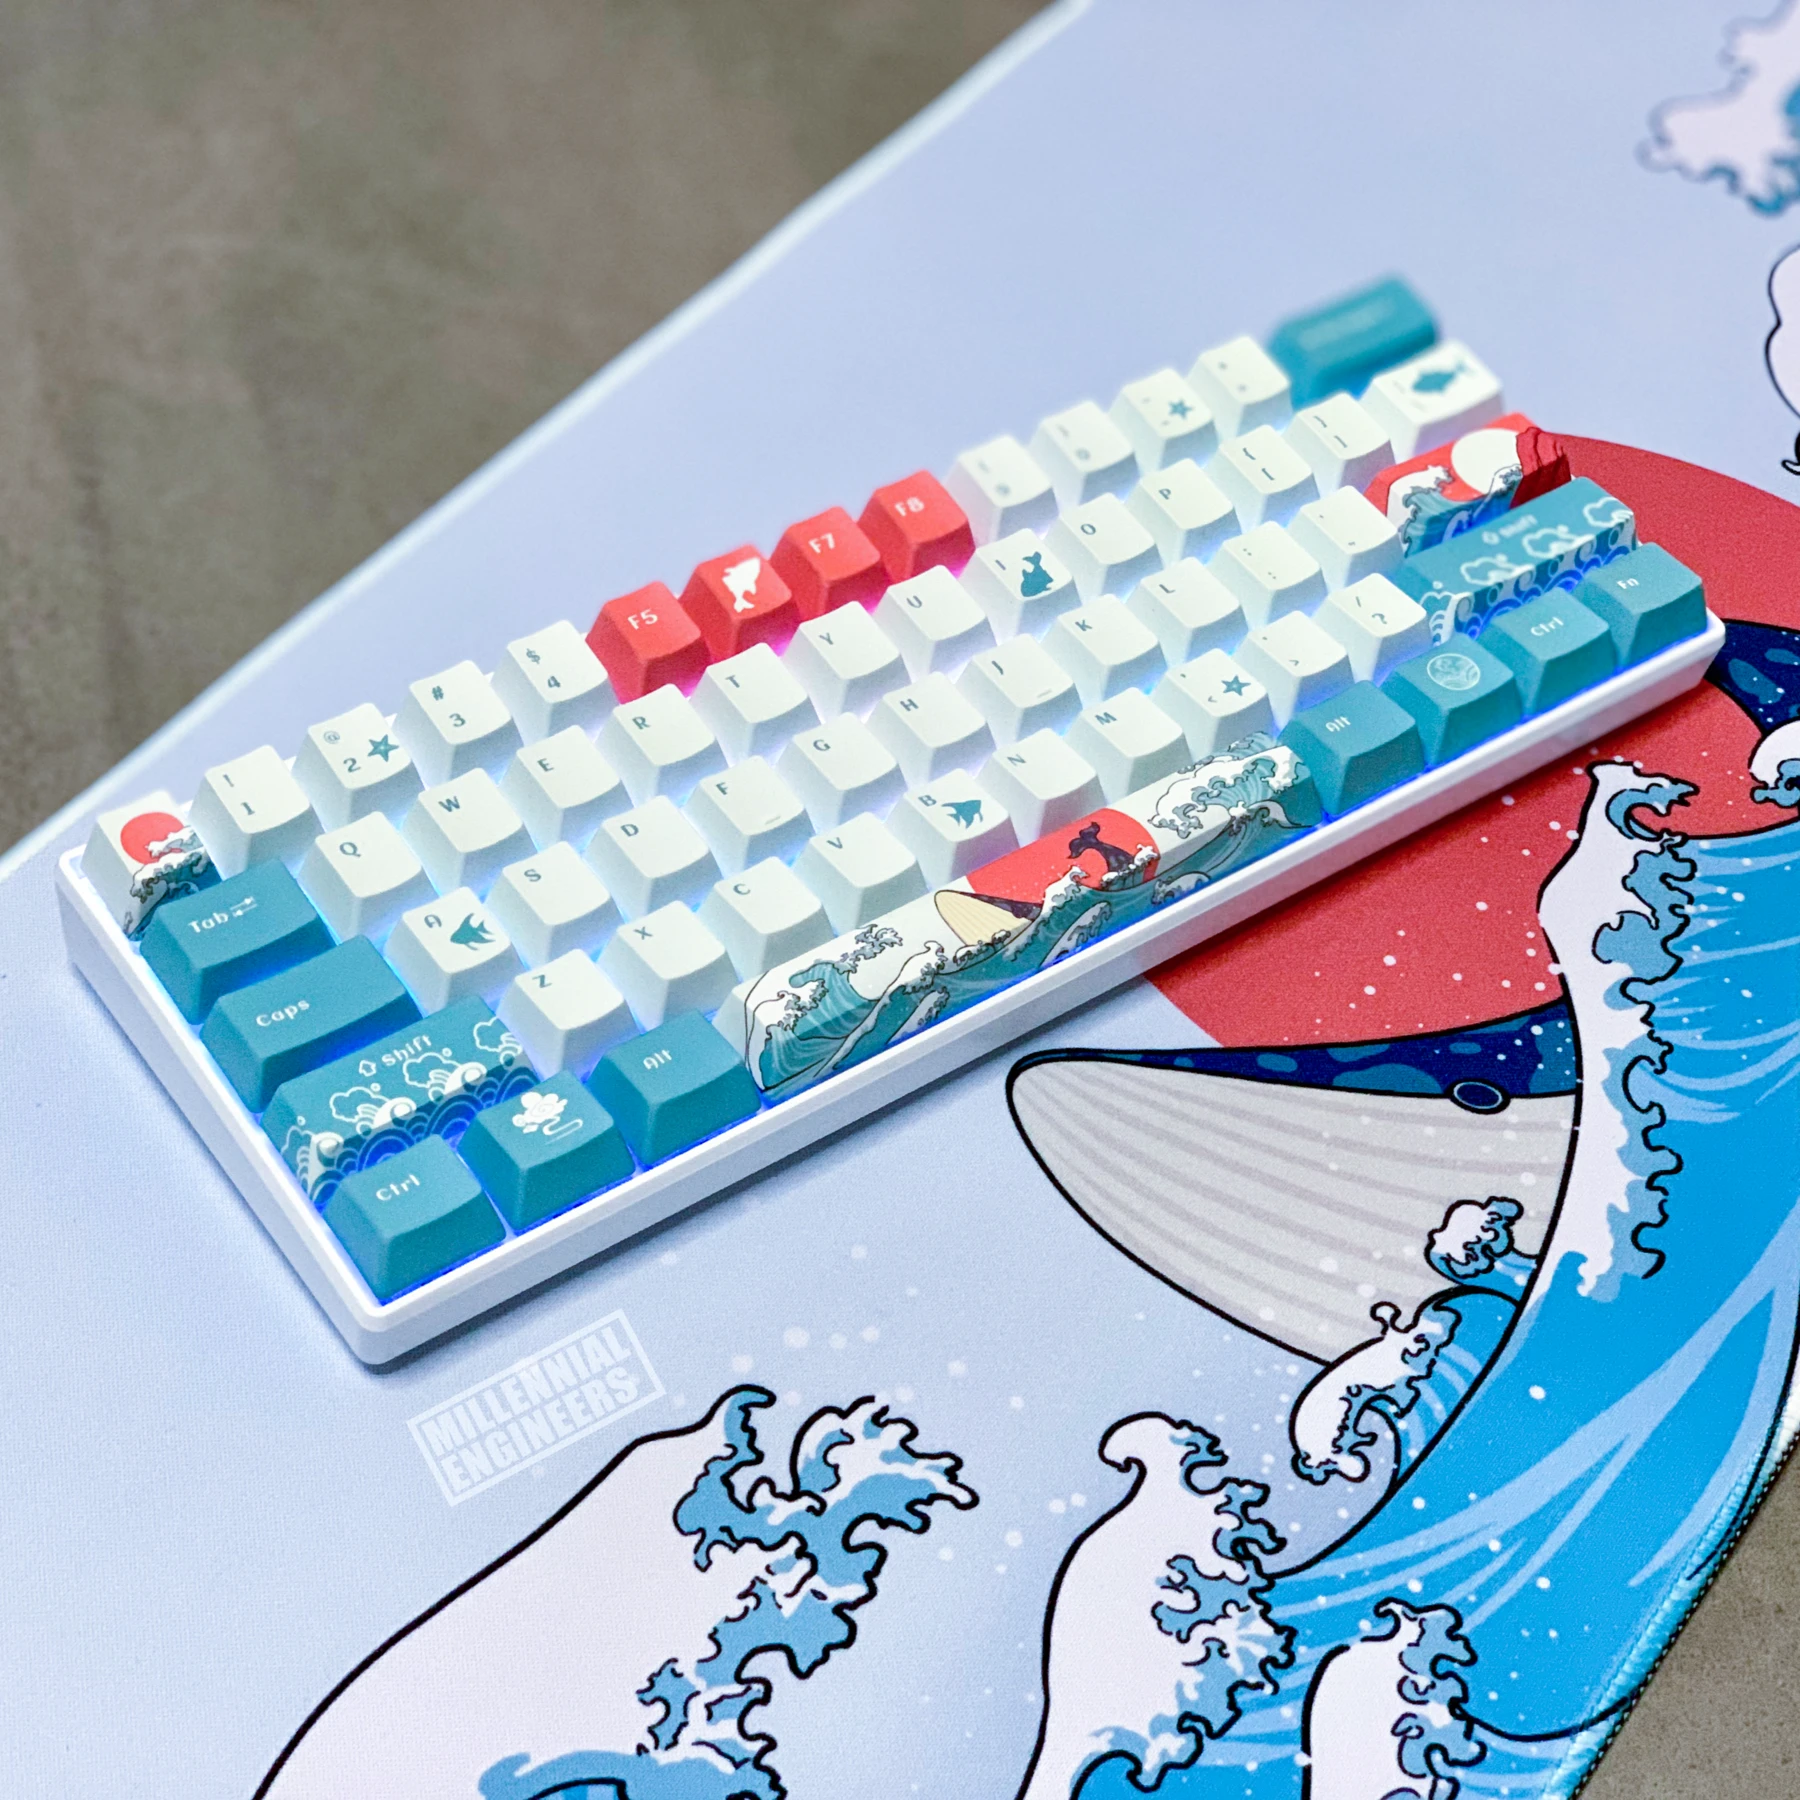 Anyone know of any good wallpaper that would match the keycap and mousepad?: wallpaperengine